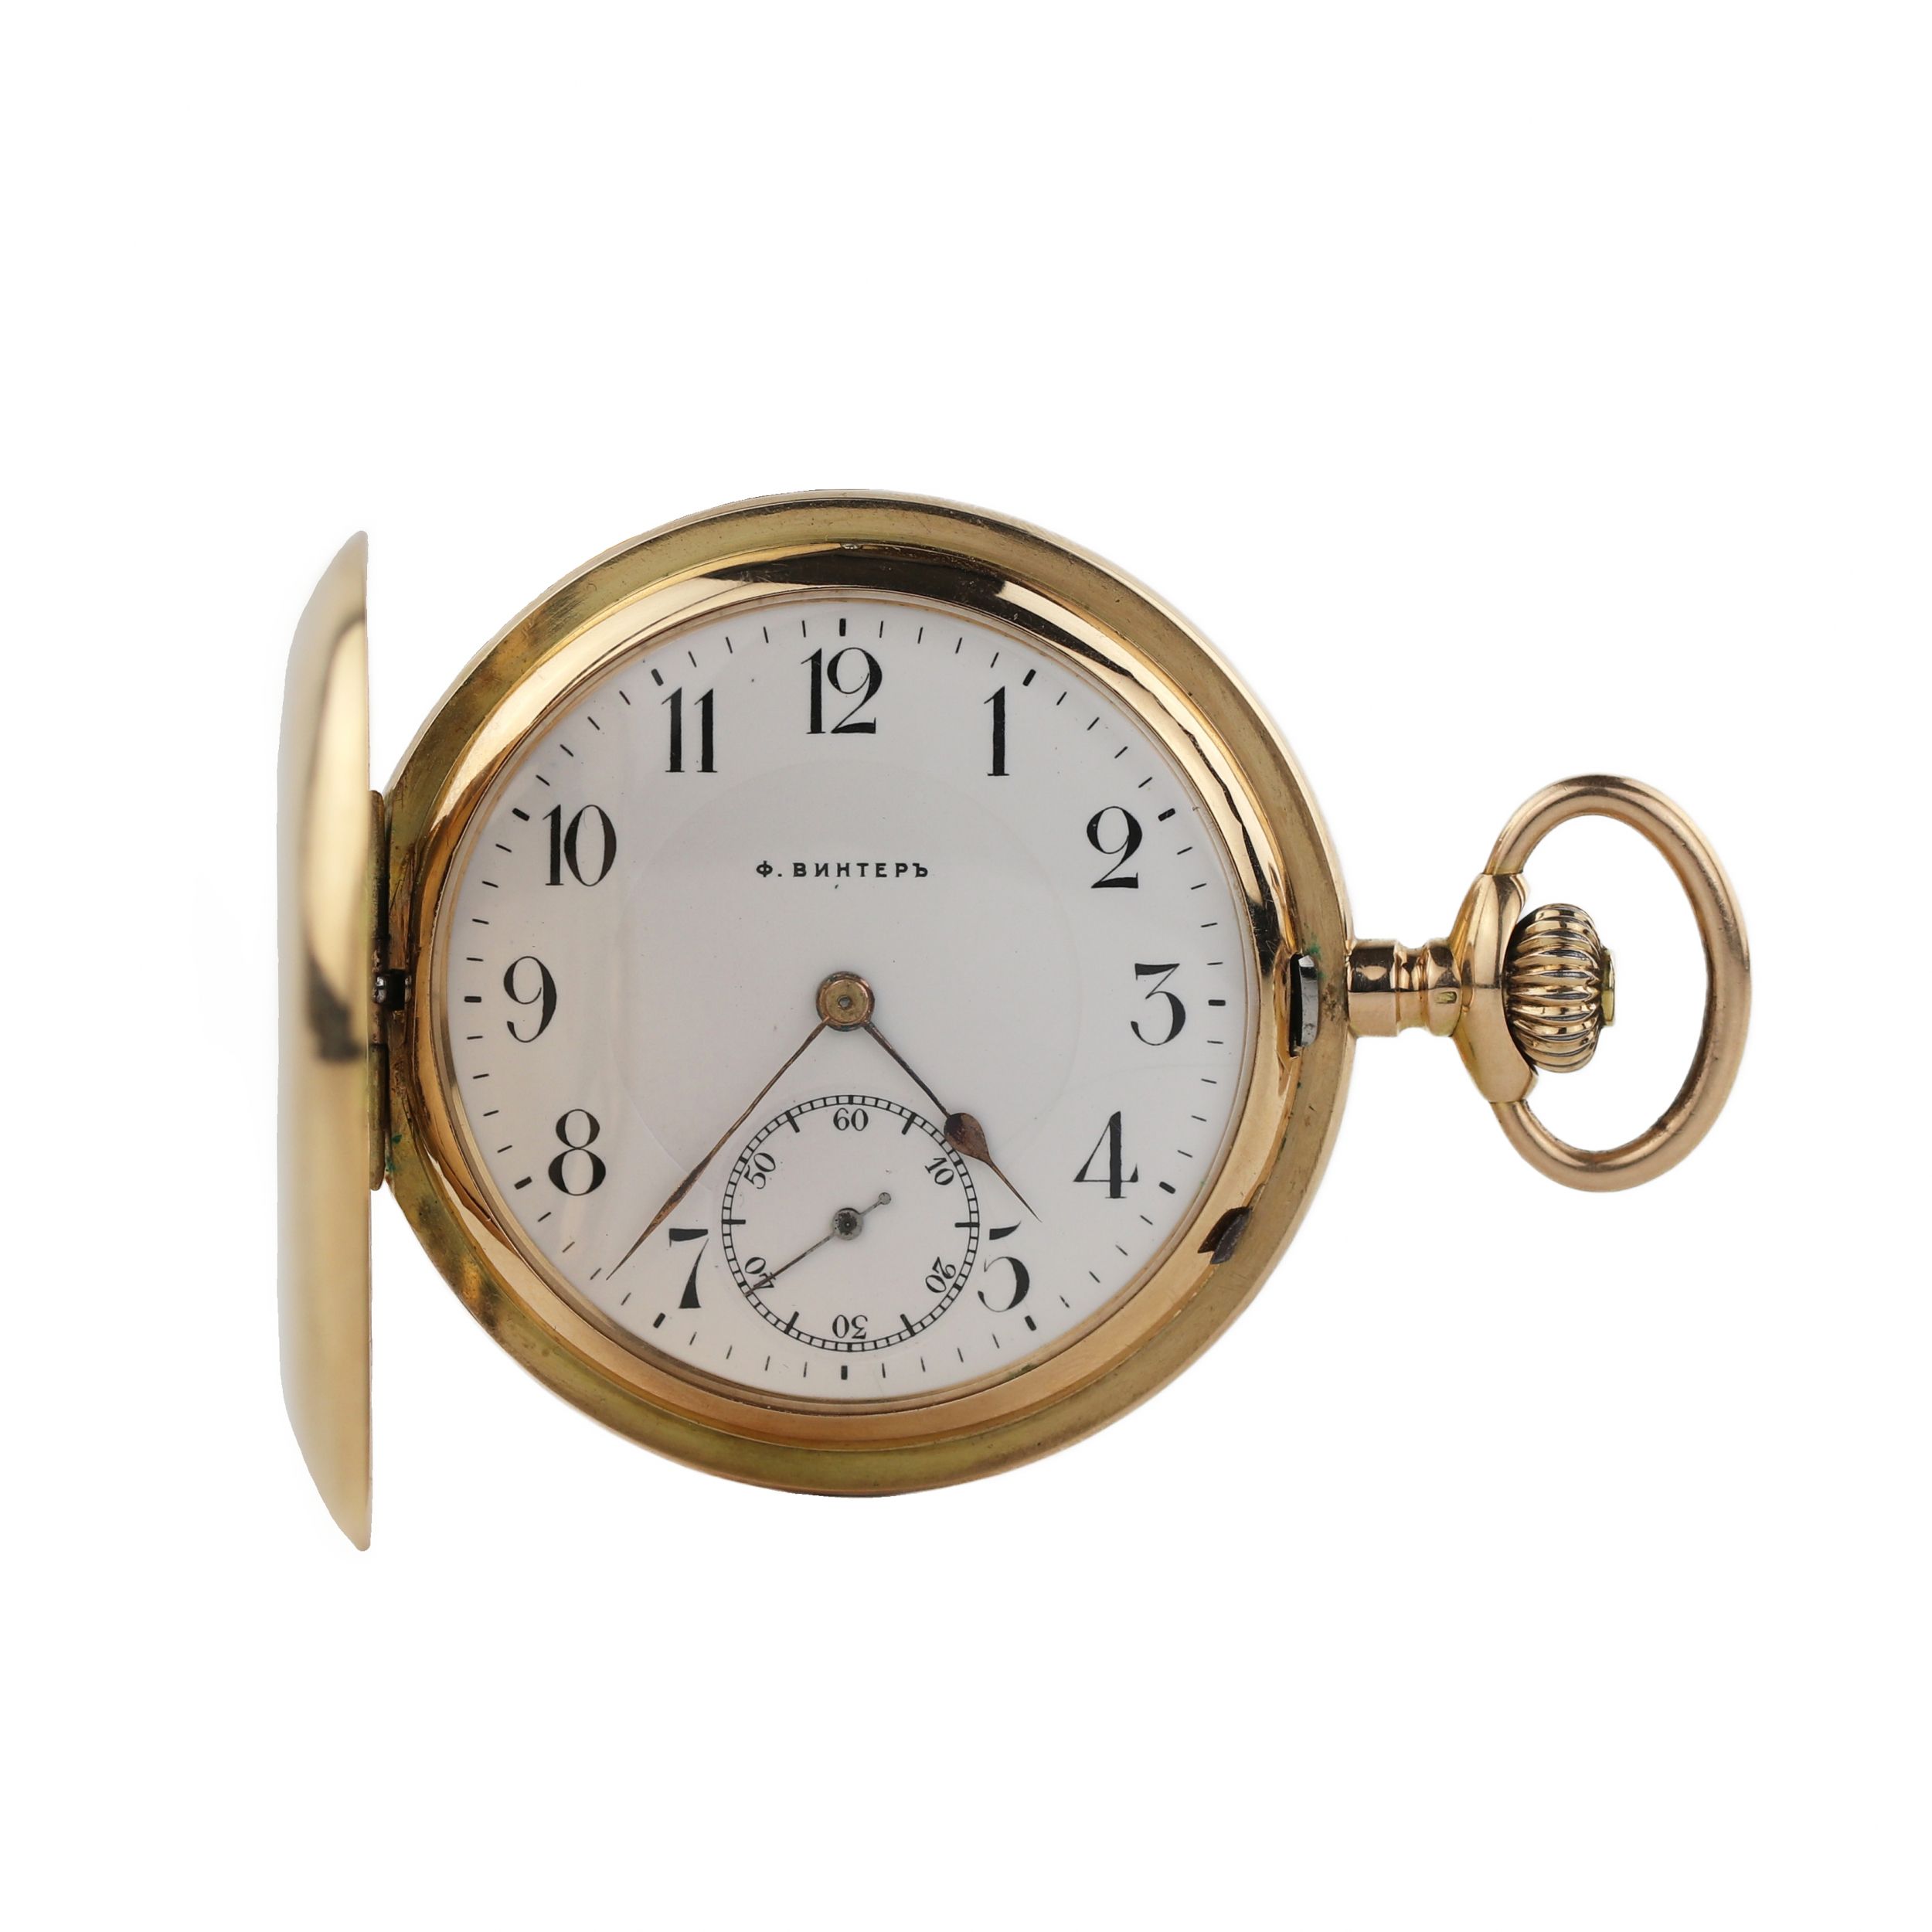 Russian, gold, pocket watch of the pre-revolutionary company F. Winter. - Image 2 of 10